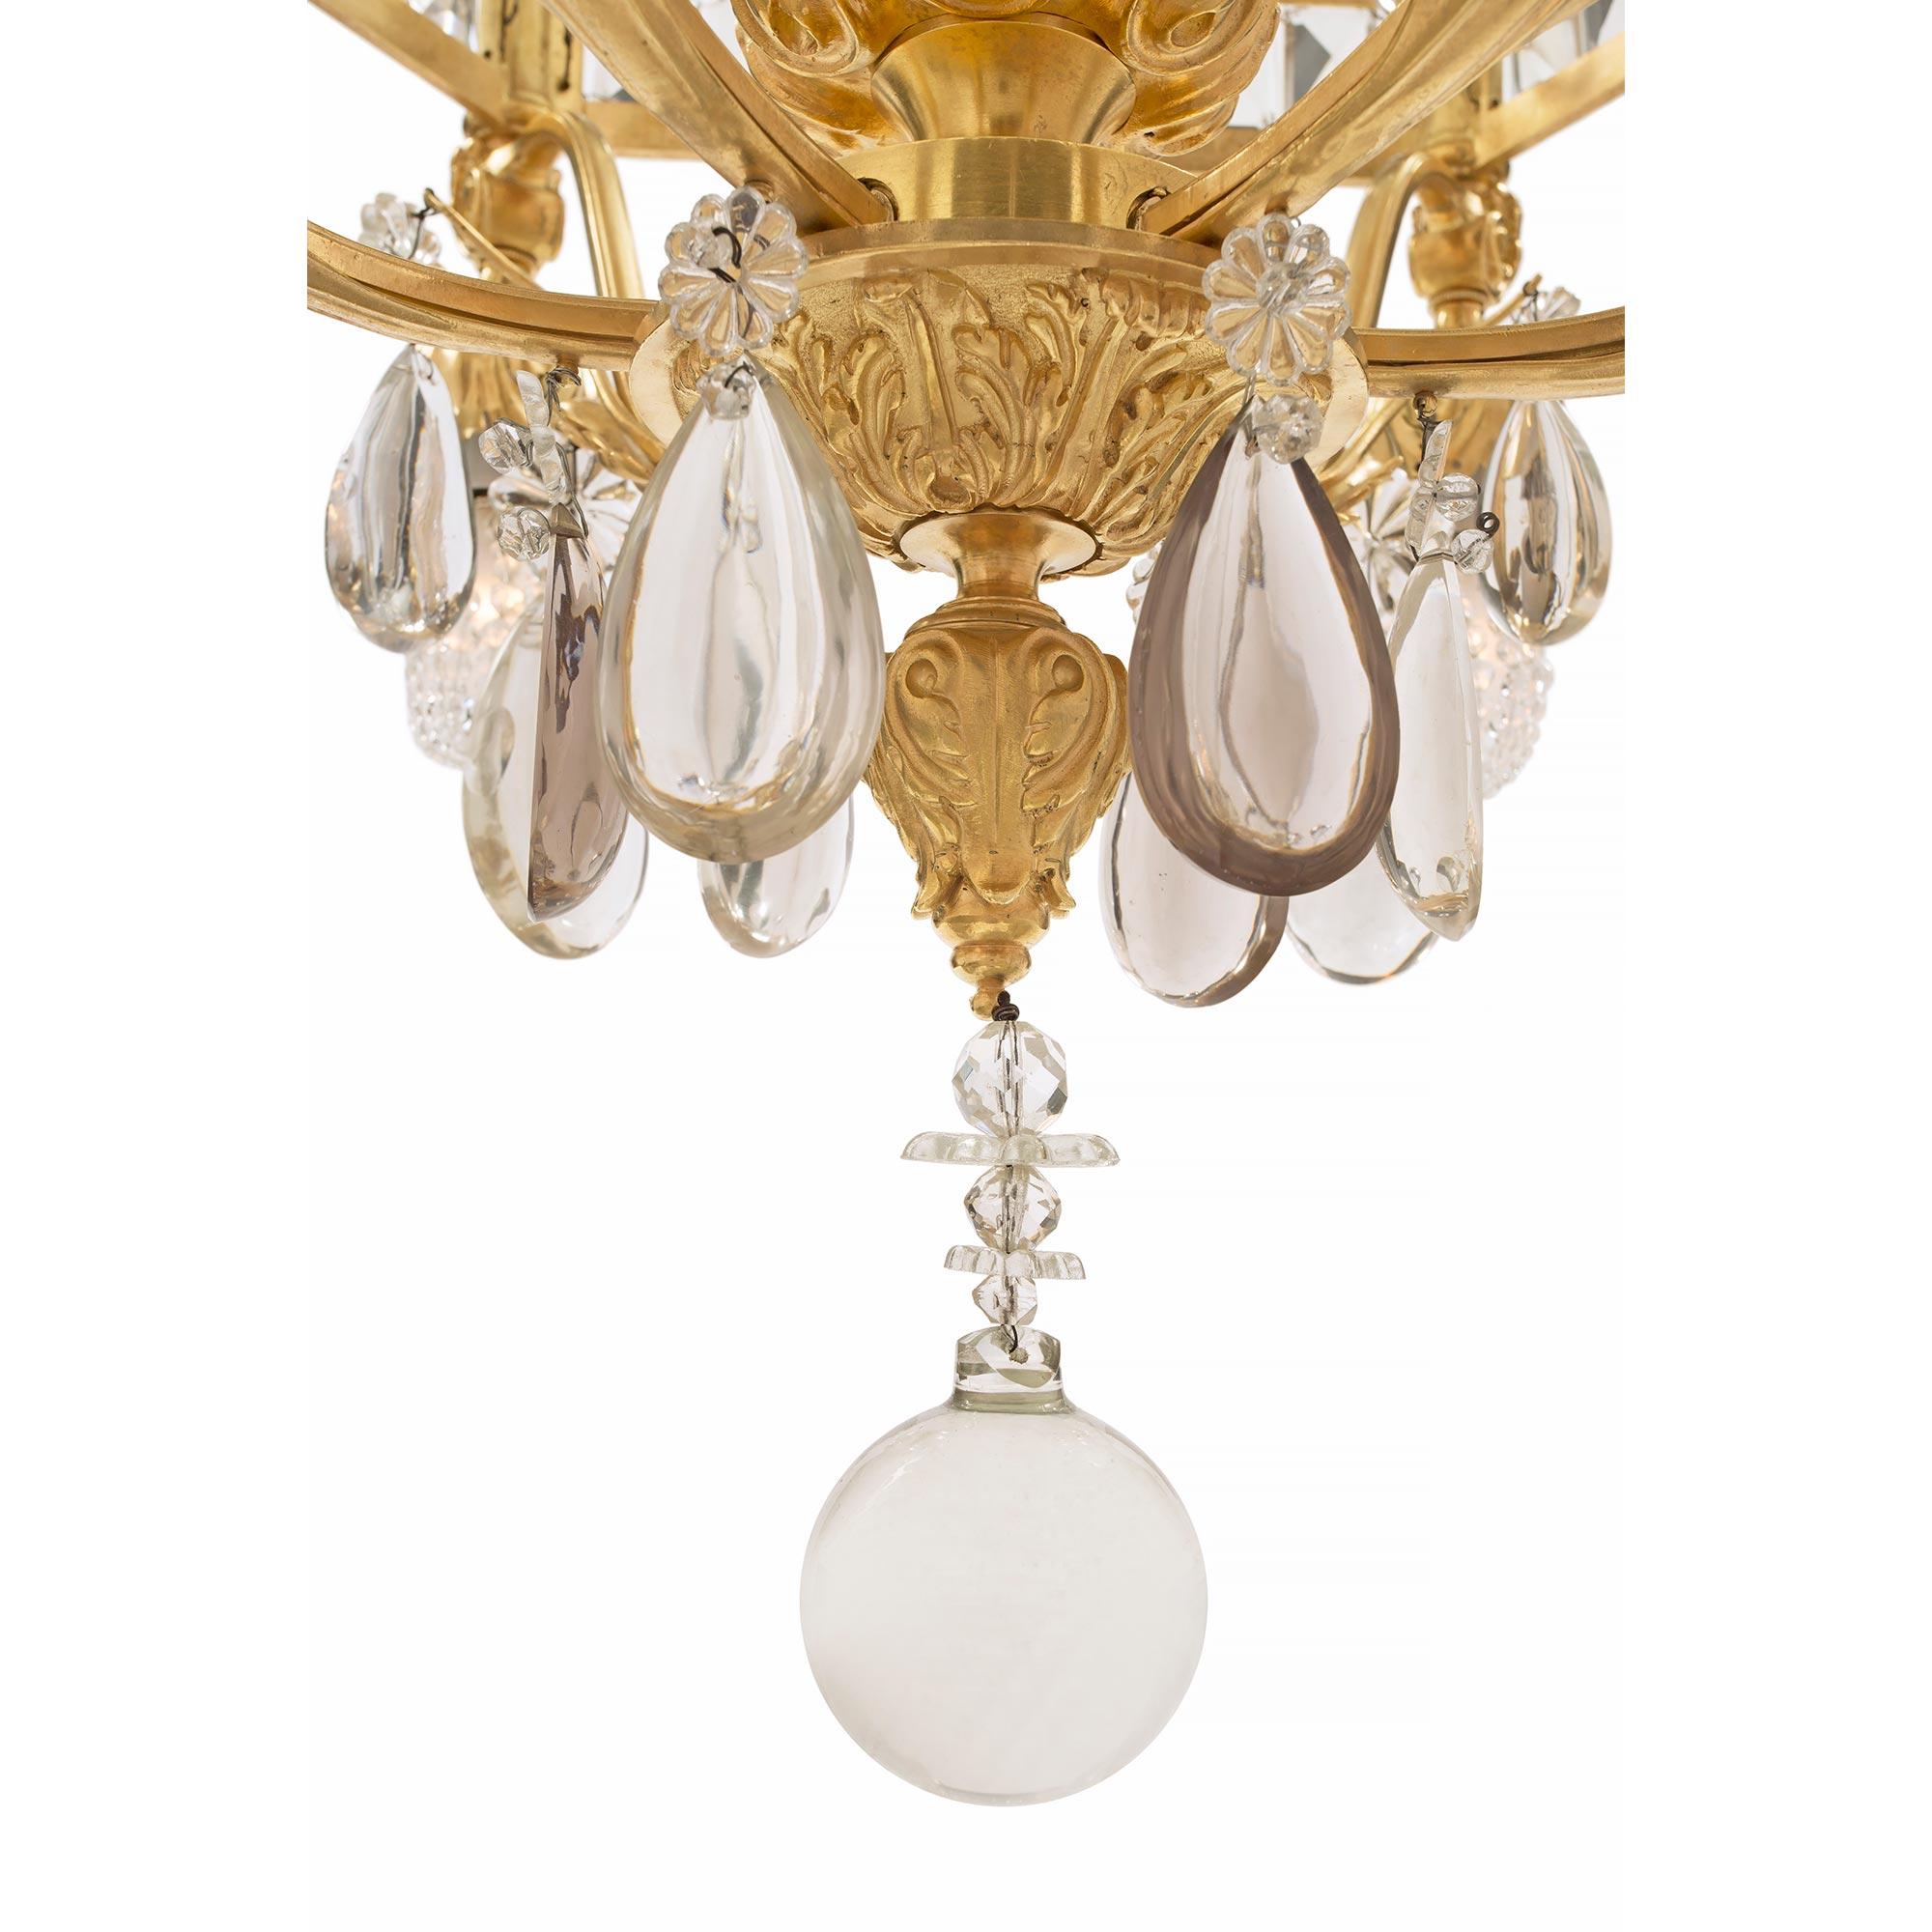 French 19th Century Louis XV Style Ormolu and Baccarat Crystal Chandelier For Sale 3